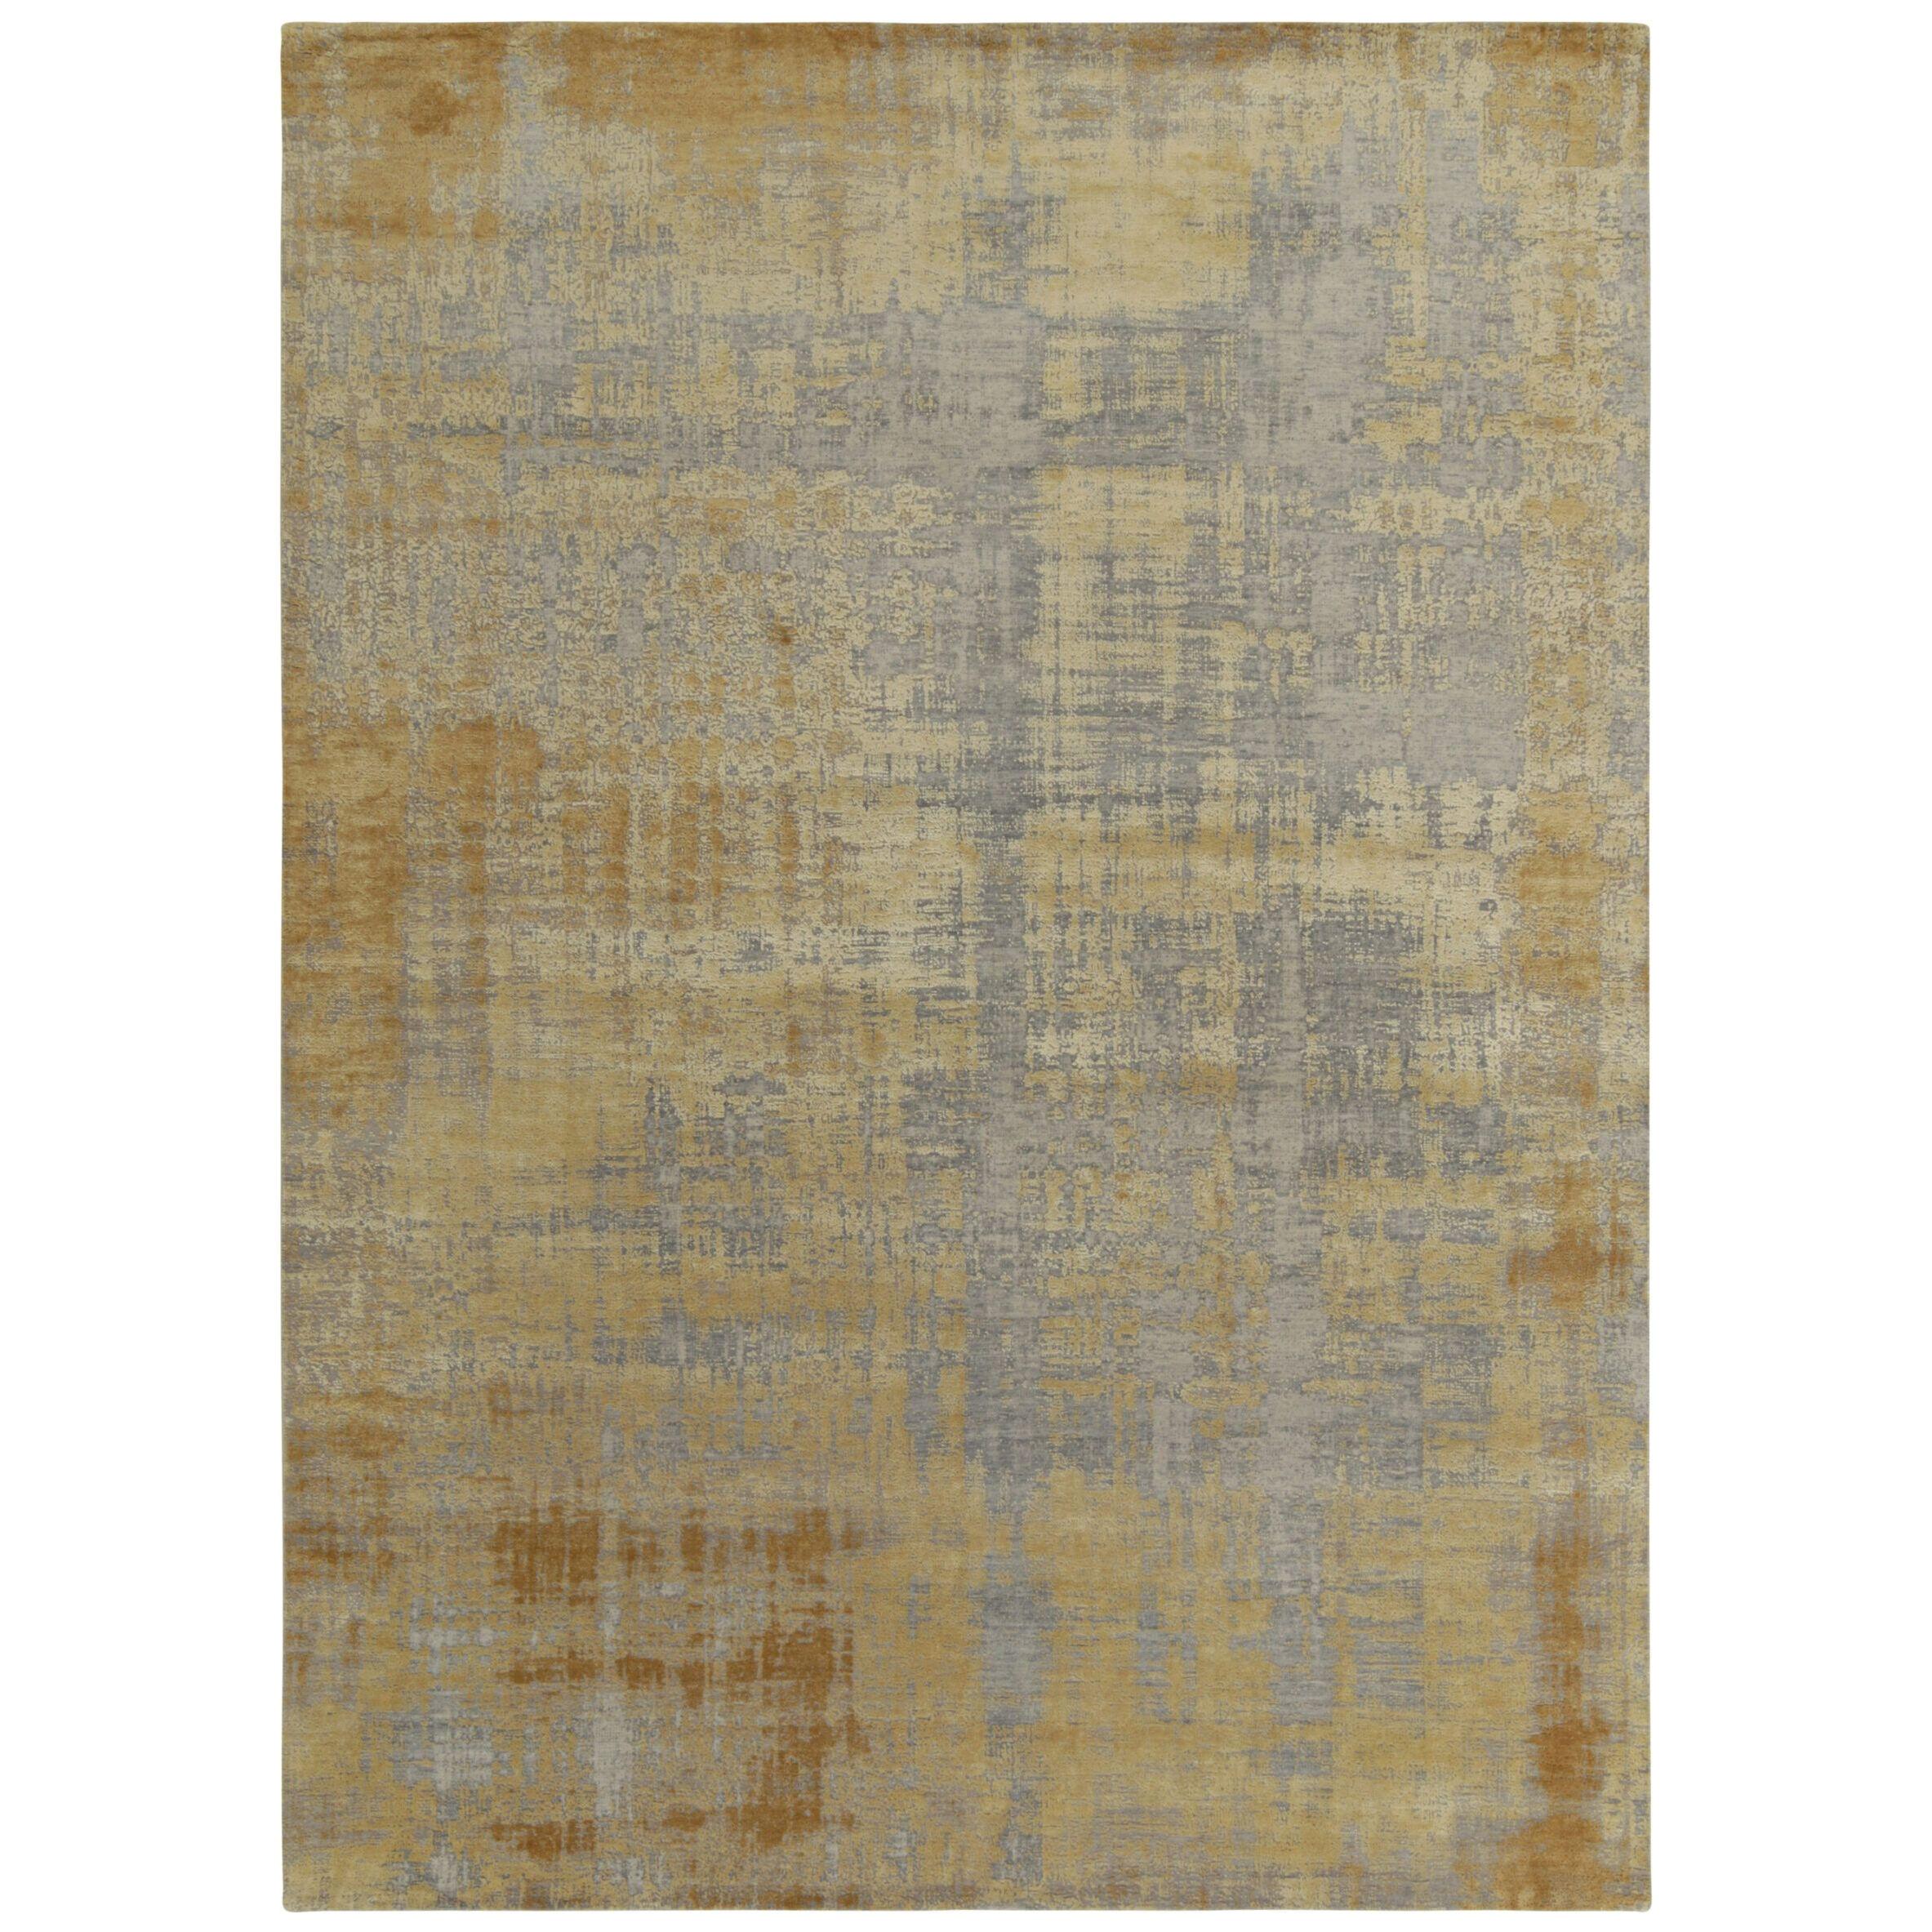 Rug & Kilim’s Abstract Rug in Gold and Silver-Gray All Over Streak Pattern